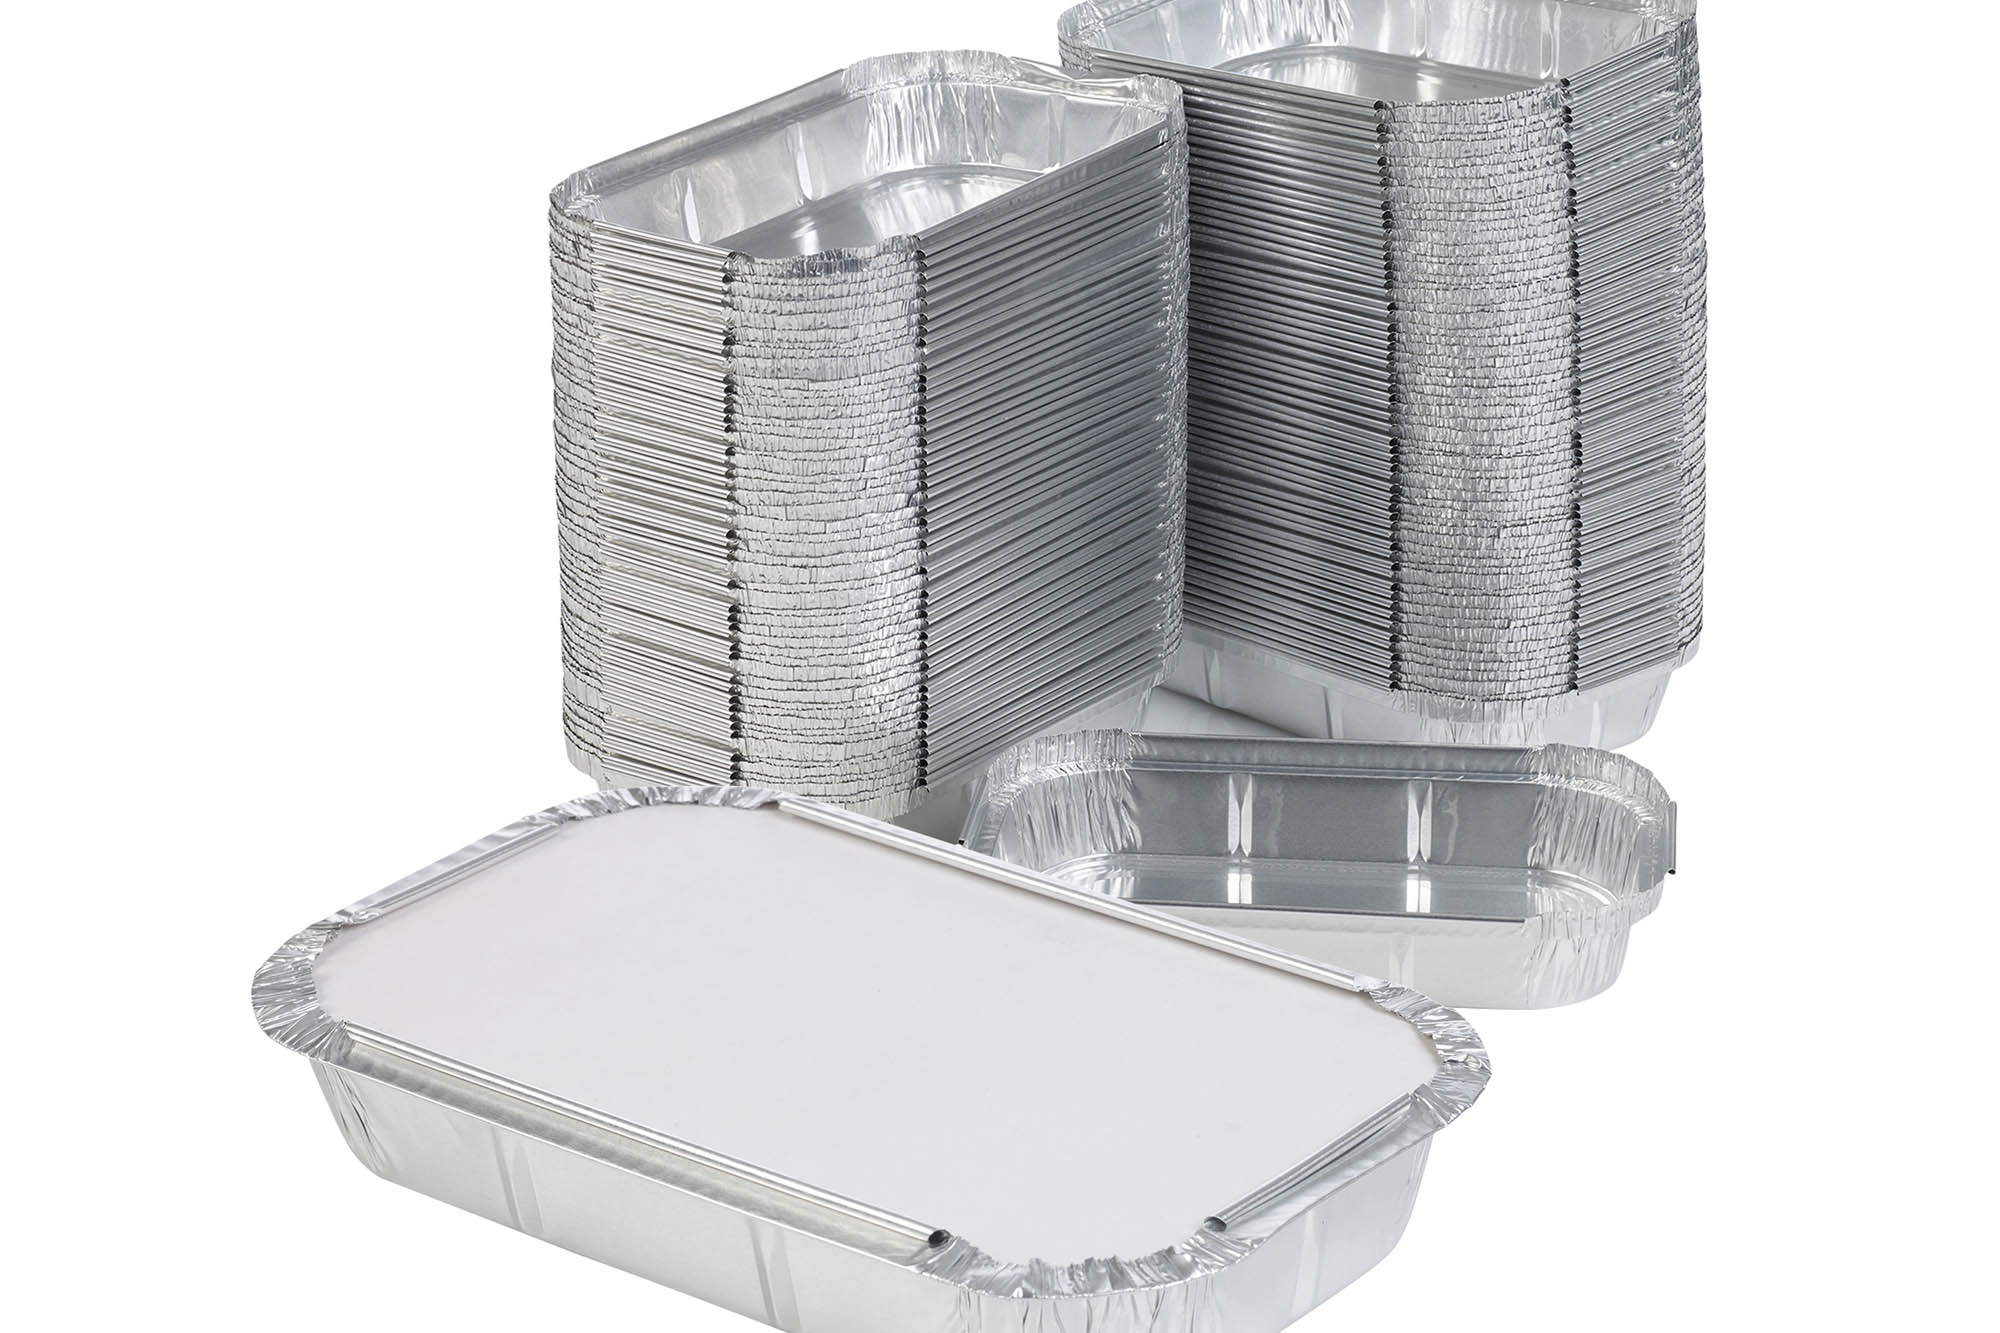 Foil containers